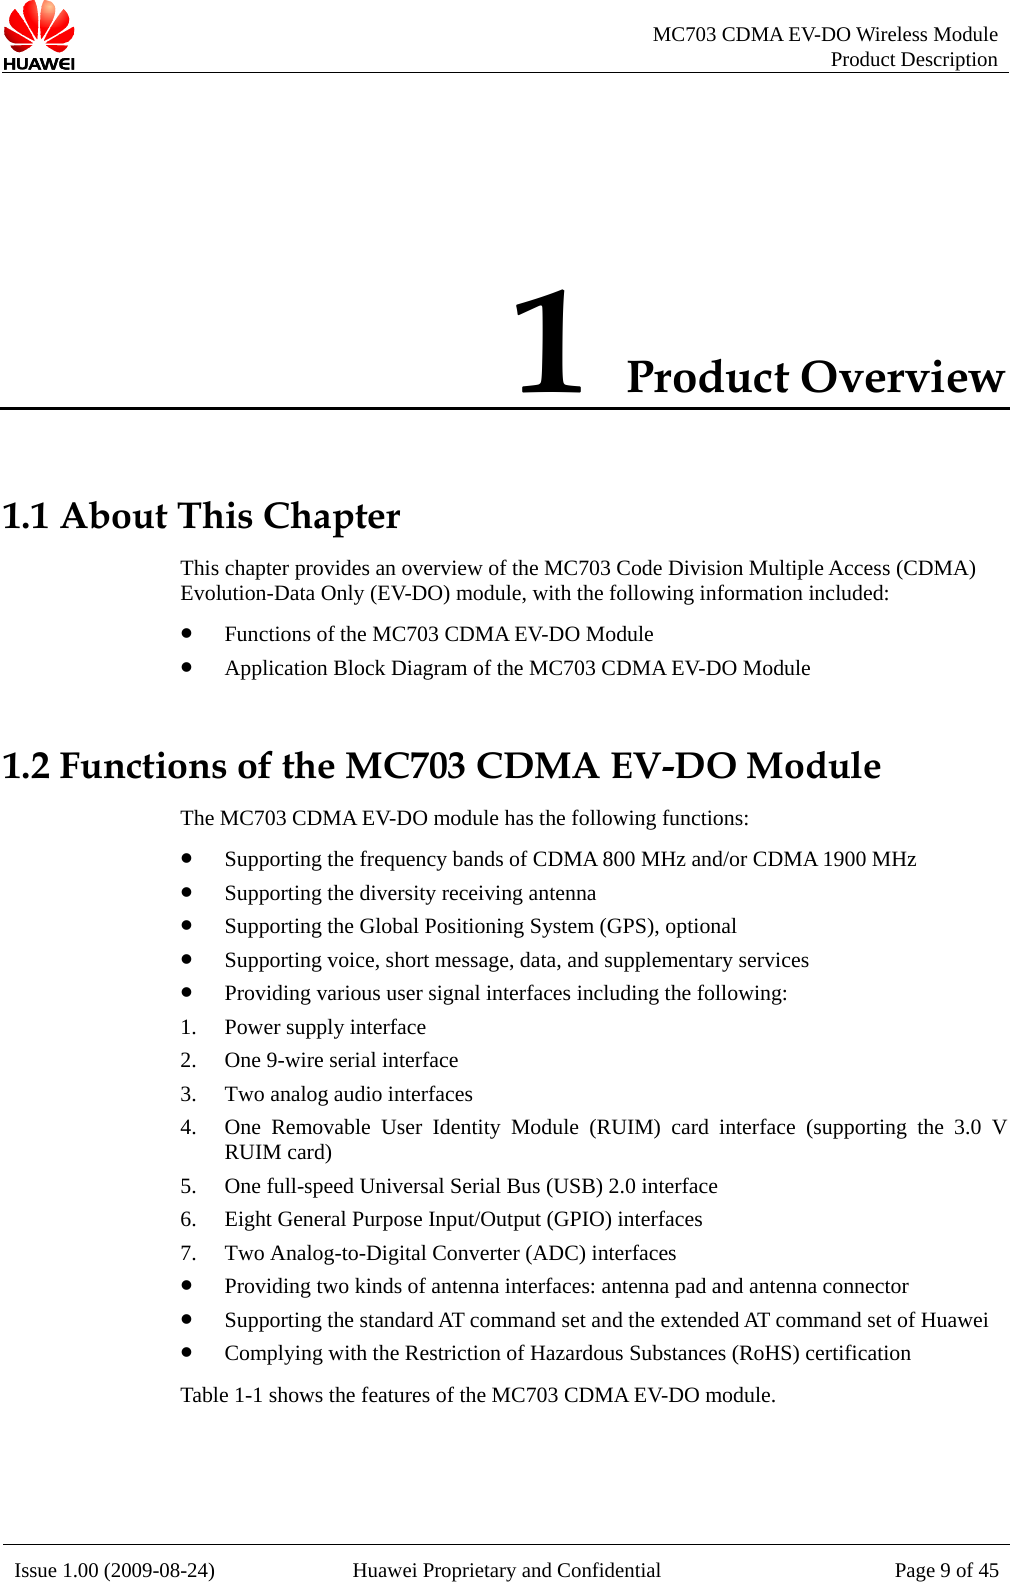   MC703 CDMA EV-DO Wireless Module Product Description Issue 1.00 (2009-08-24)  Huawei Proprietary and Confidential Page 9 of 451 Product Overview 1.1 About This Chapter is  Access (CDMA) Evolution-Data Only (EV-DO) module, with the following information included: z Functions of the MC703 CDMA EV-DO Module 1.2 Functio s 1900 MHz ositioning System (GPS), optional  data, and supplementary services interfaces including the following: 2. nterface interface (supporting the 3.0 V nna connector z Supporting the standard AT command set and the extended AT command set of Huawei estriction of Hazardous Substances (RoHS) certification The feat C703 CDMA EV-DO module. Th  chapter provides an overview of the MC703 Code Division Multiplez Application Block Diagram of the MC703 CDMA EV-DO Module n  of the MC703 CDMA EV-DO Module The MC703 CDMA EV-DO module has the following functions:z Supporting the frequency bands of CDMA 800 MHz and/or CDMA z Supporting the diversity receiving antenna z Supporting the Global Pz Supporting voice, short message,z Providing various user signal 1. Power supply interface One 9-wire serial i3. Two analog audio interfaces 4. One Removable User Identity Module (RUIM) card RUIM card)   5. One full-speed Universal Serial Bus (USB) 2.0 interface 6. Eight General Purpose Input/Output (GPIO) interfaces 7. Two Analog-to-Digital Converter (ADC) interfaces z Providing two kinds of antenna interfaces: antenna pad and antez Complying with the Rable 1-1 shows t ures of the M 